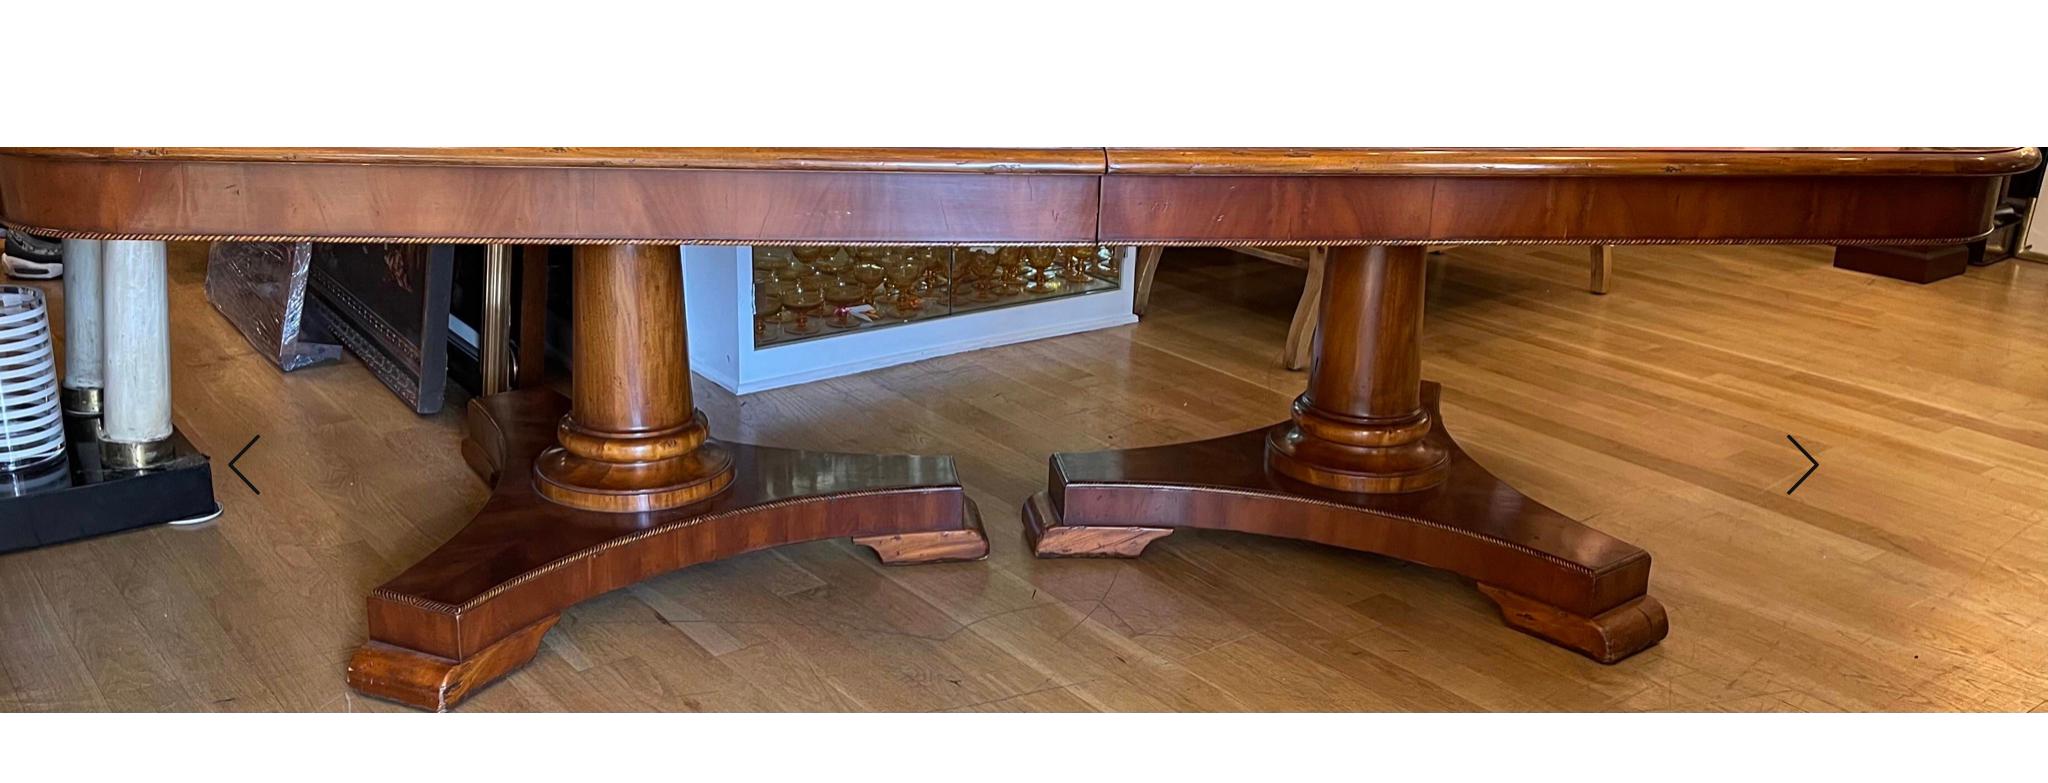 Spanish Colonial 18th C style Alfonso Marina Ebanista dining table
Includes two leaves each measuring 24” wide.